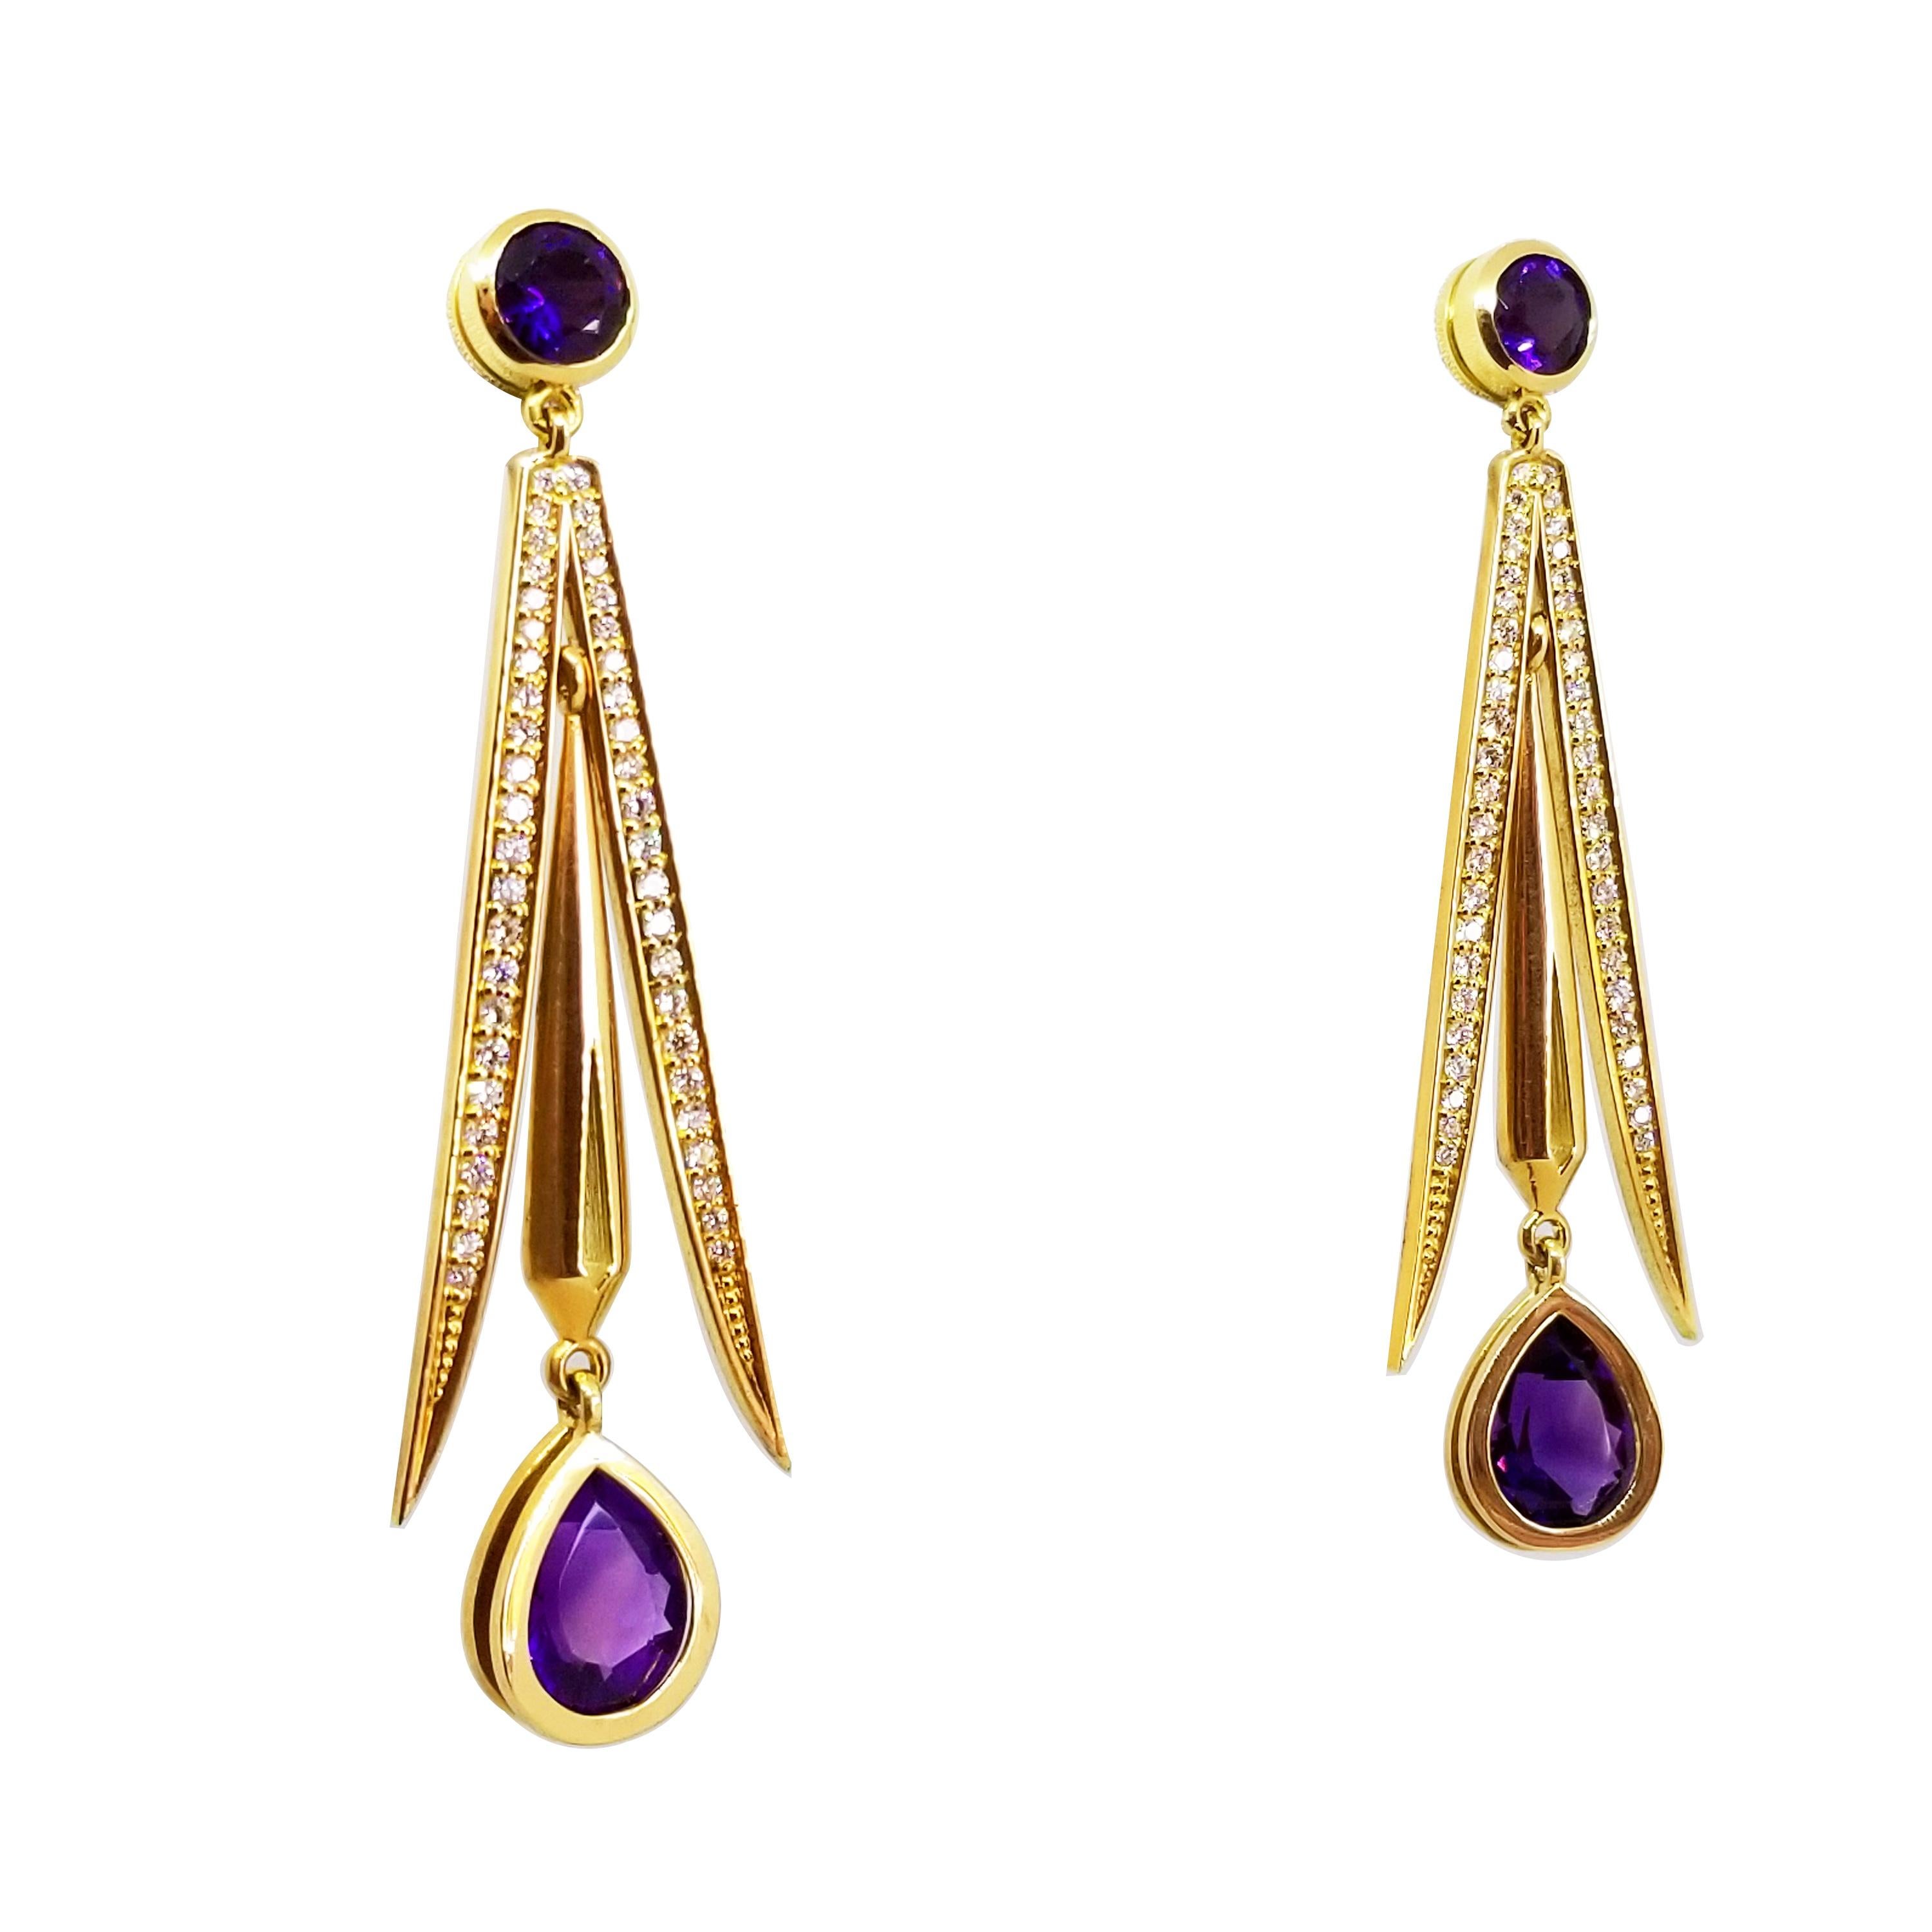 These Long and Elegant Statement Earrings are One of a Kind in 18K Yellow Gold. The Dramatic Earrings feature faceted, Pear Shape and Round Amethysts of Intense Purple Hue and Gem Quality. At the ear, each bezel set, Round Amethyst Gemstone measures